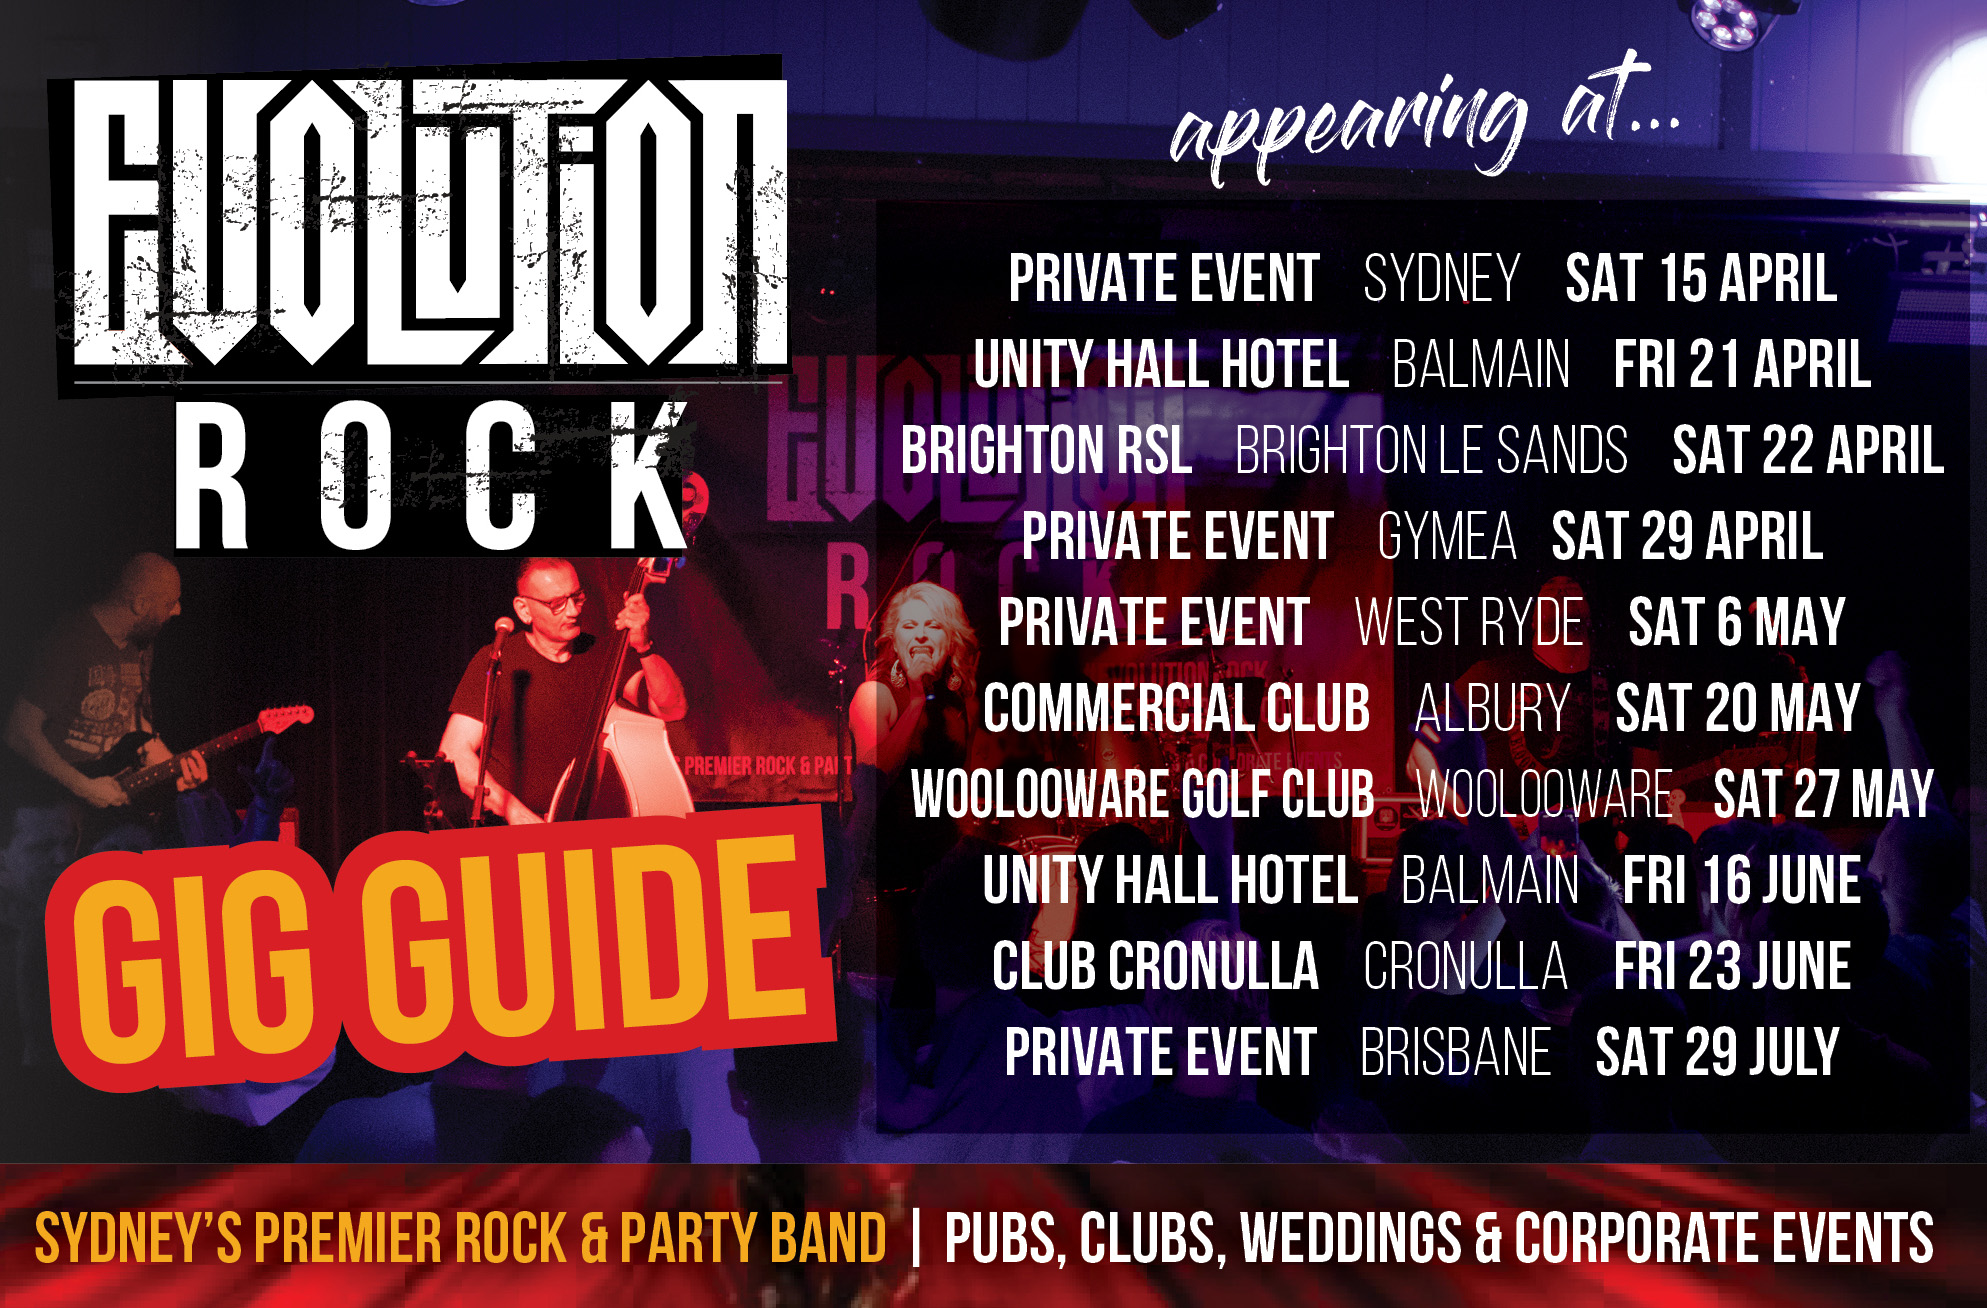 evolution rock, sutherland shire covers band, rock band, sydney covers band, pub band, party band, 5 piece band, female singer, wedding band, rock guitar band, double bass